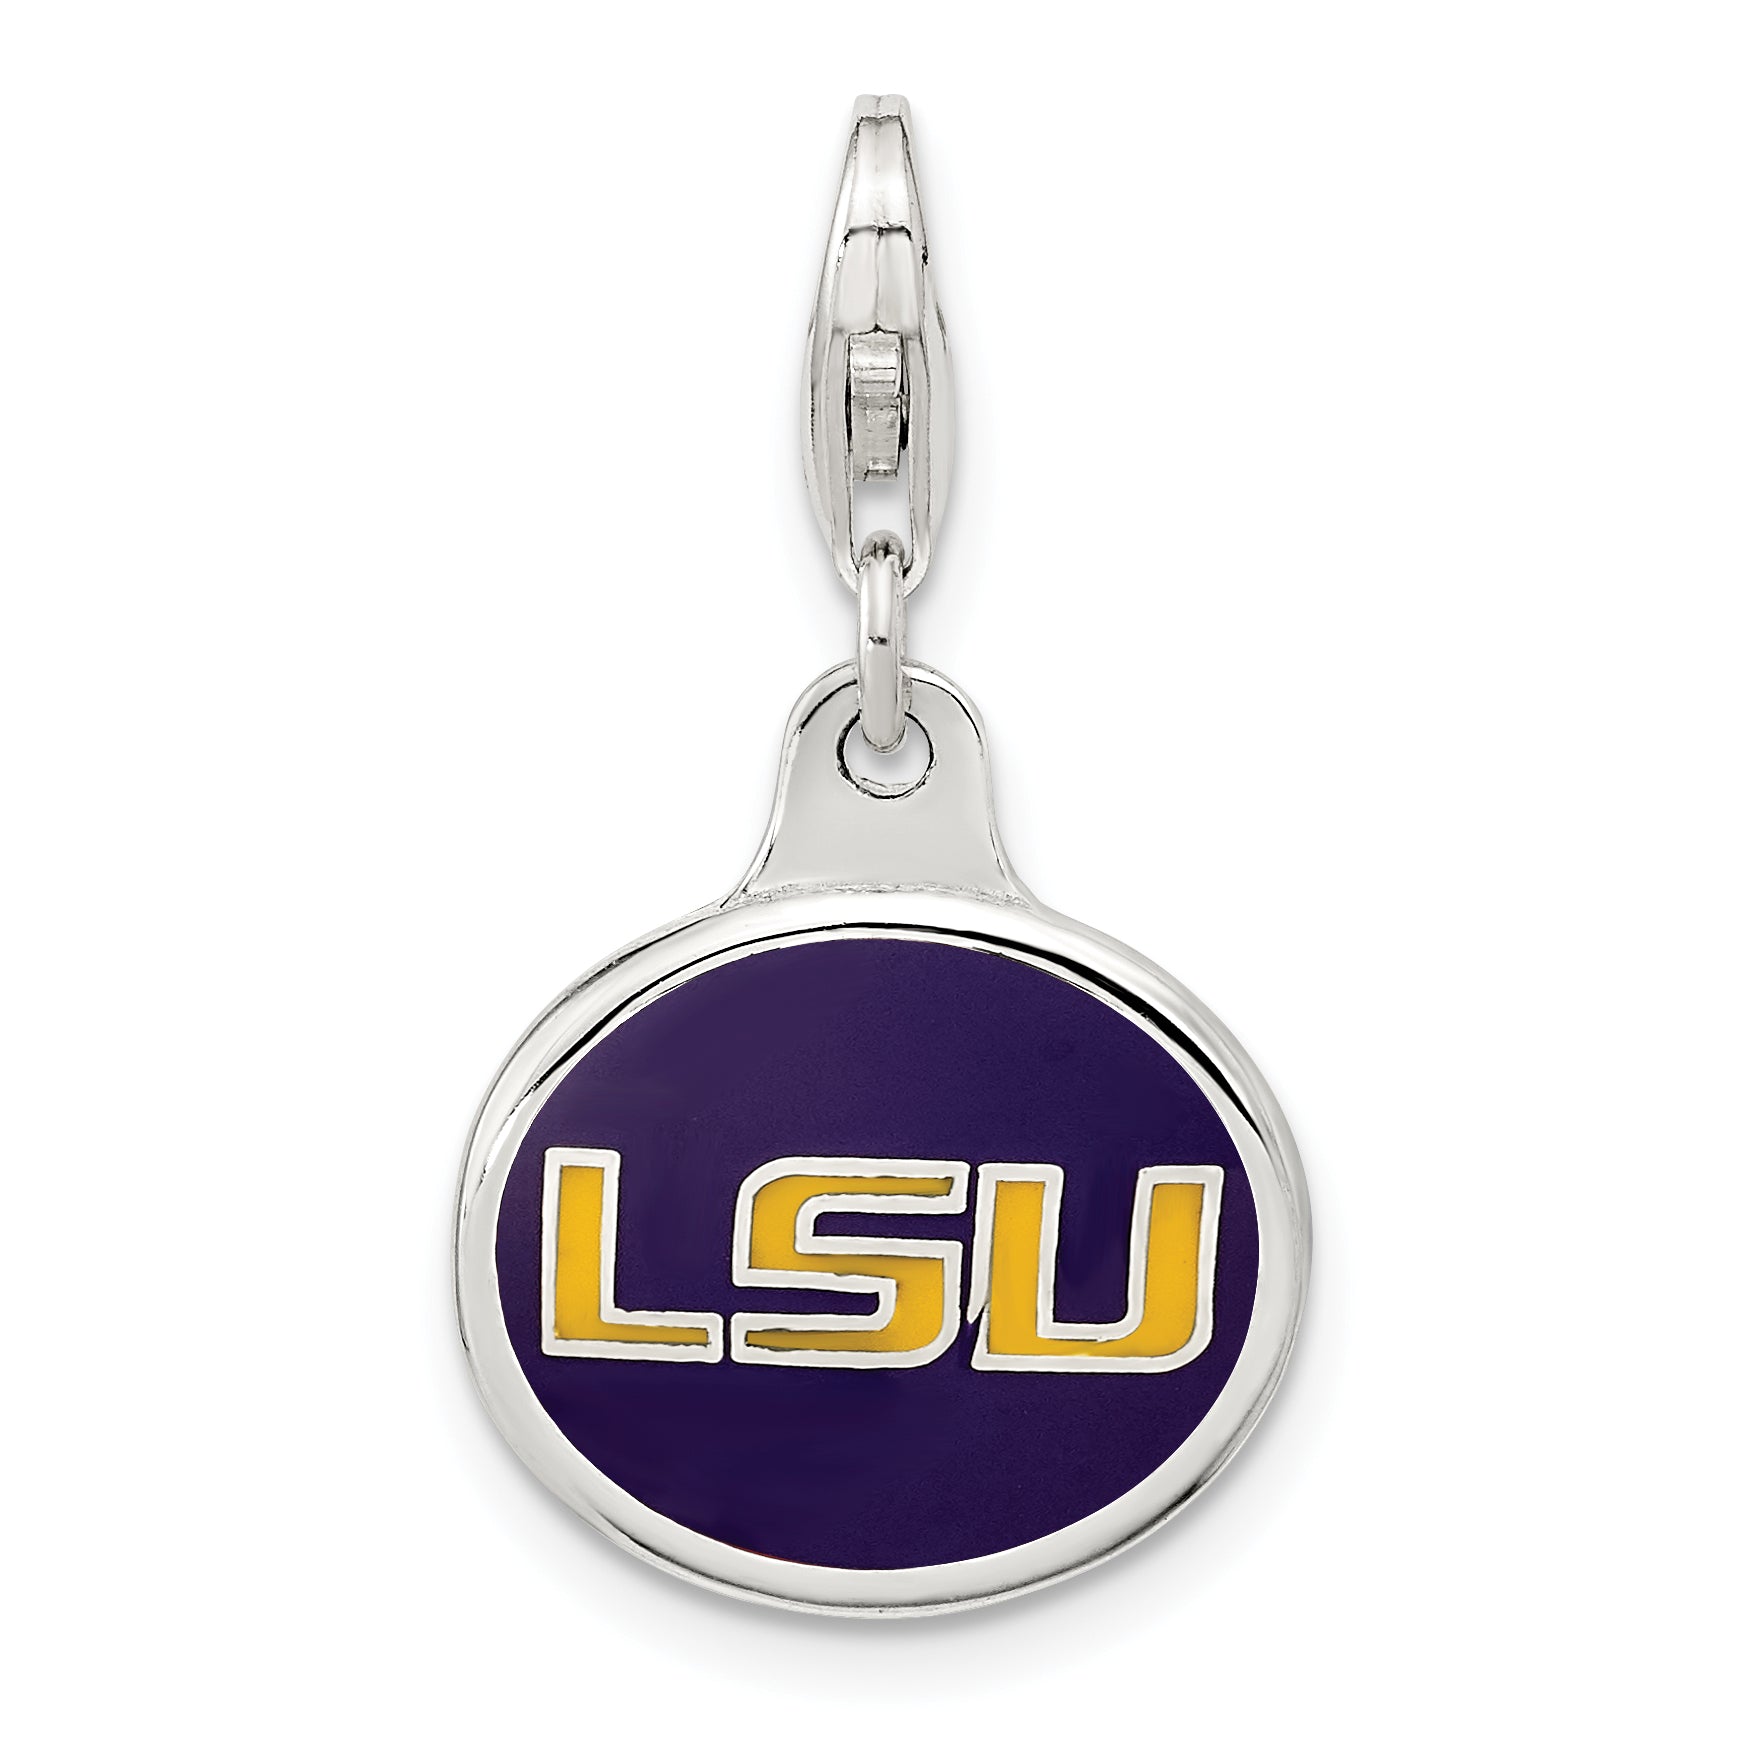 Amore La Vita Sterling Silver Rhodium-plated Polished Enameled Louisiana State University Charm with Fancy Lobster Clasp